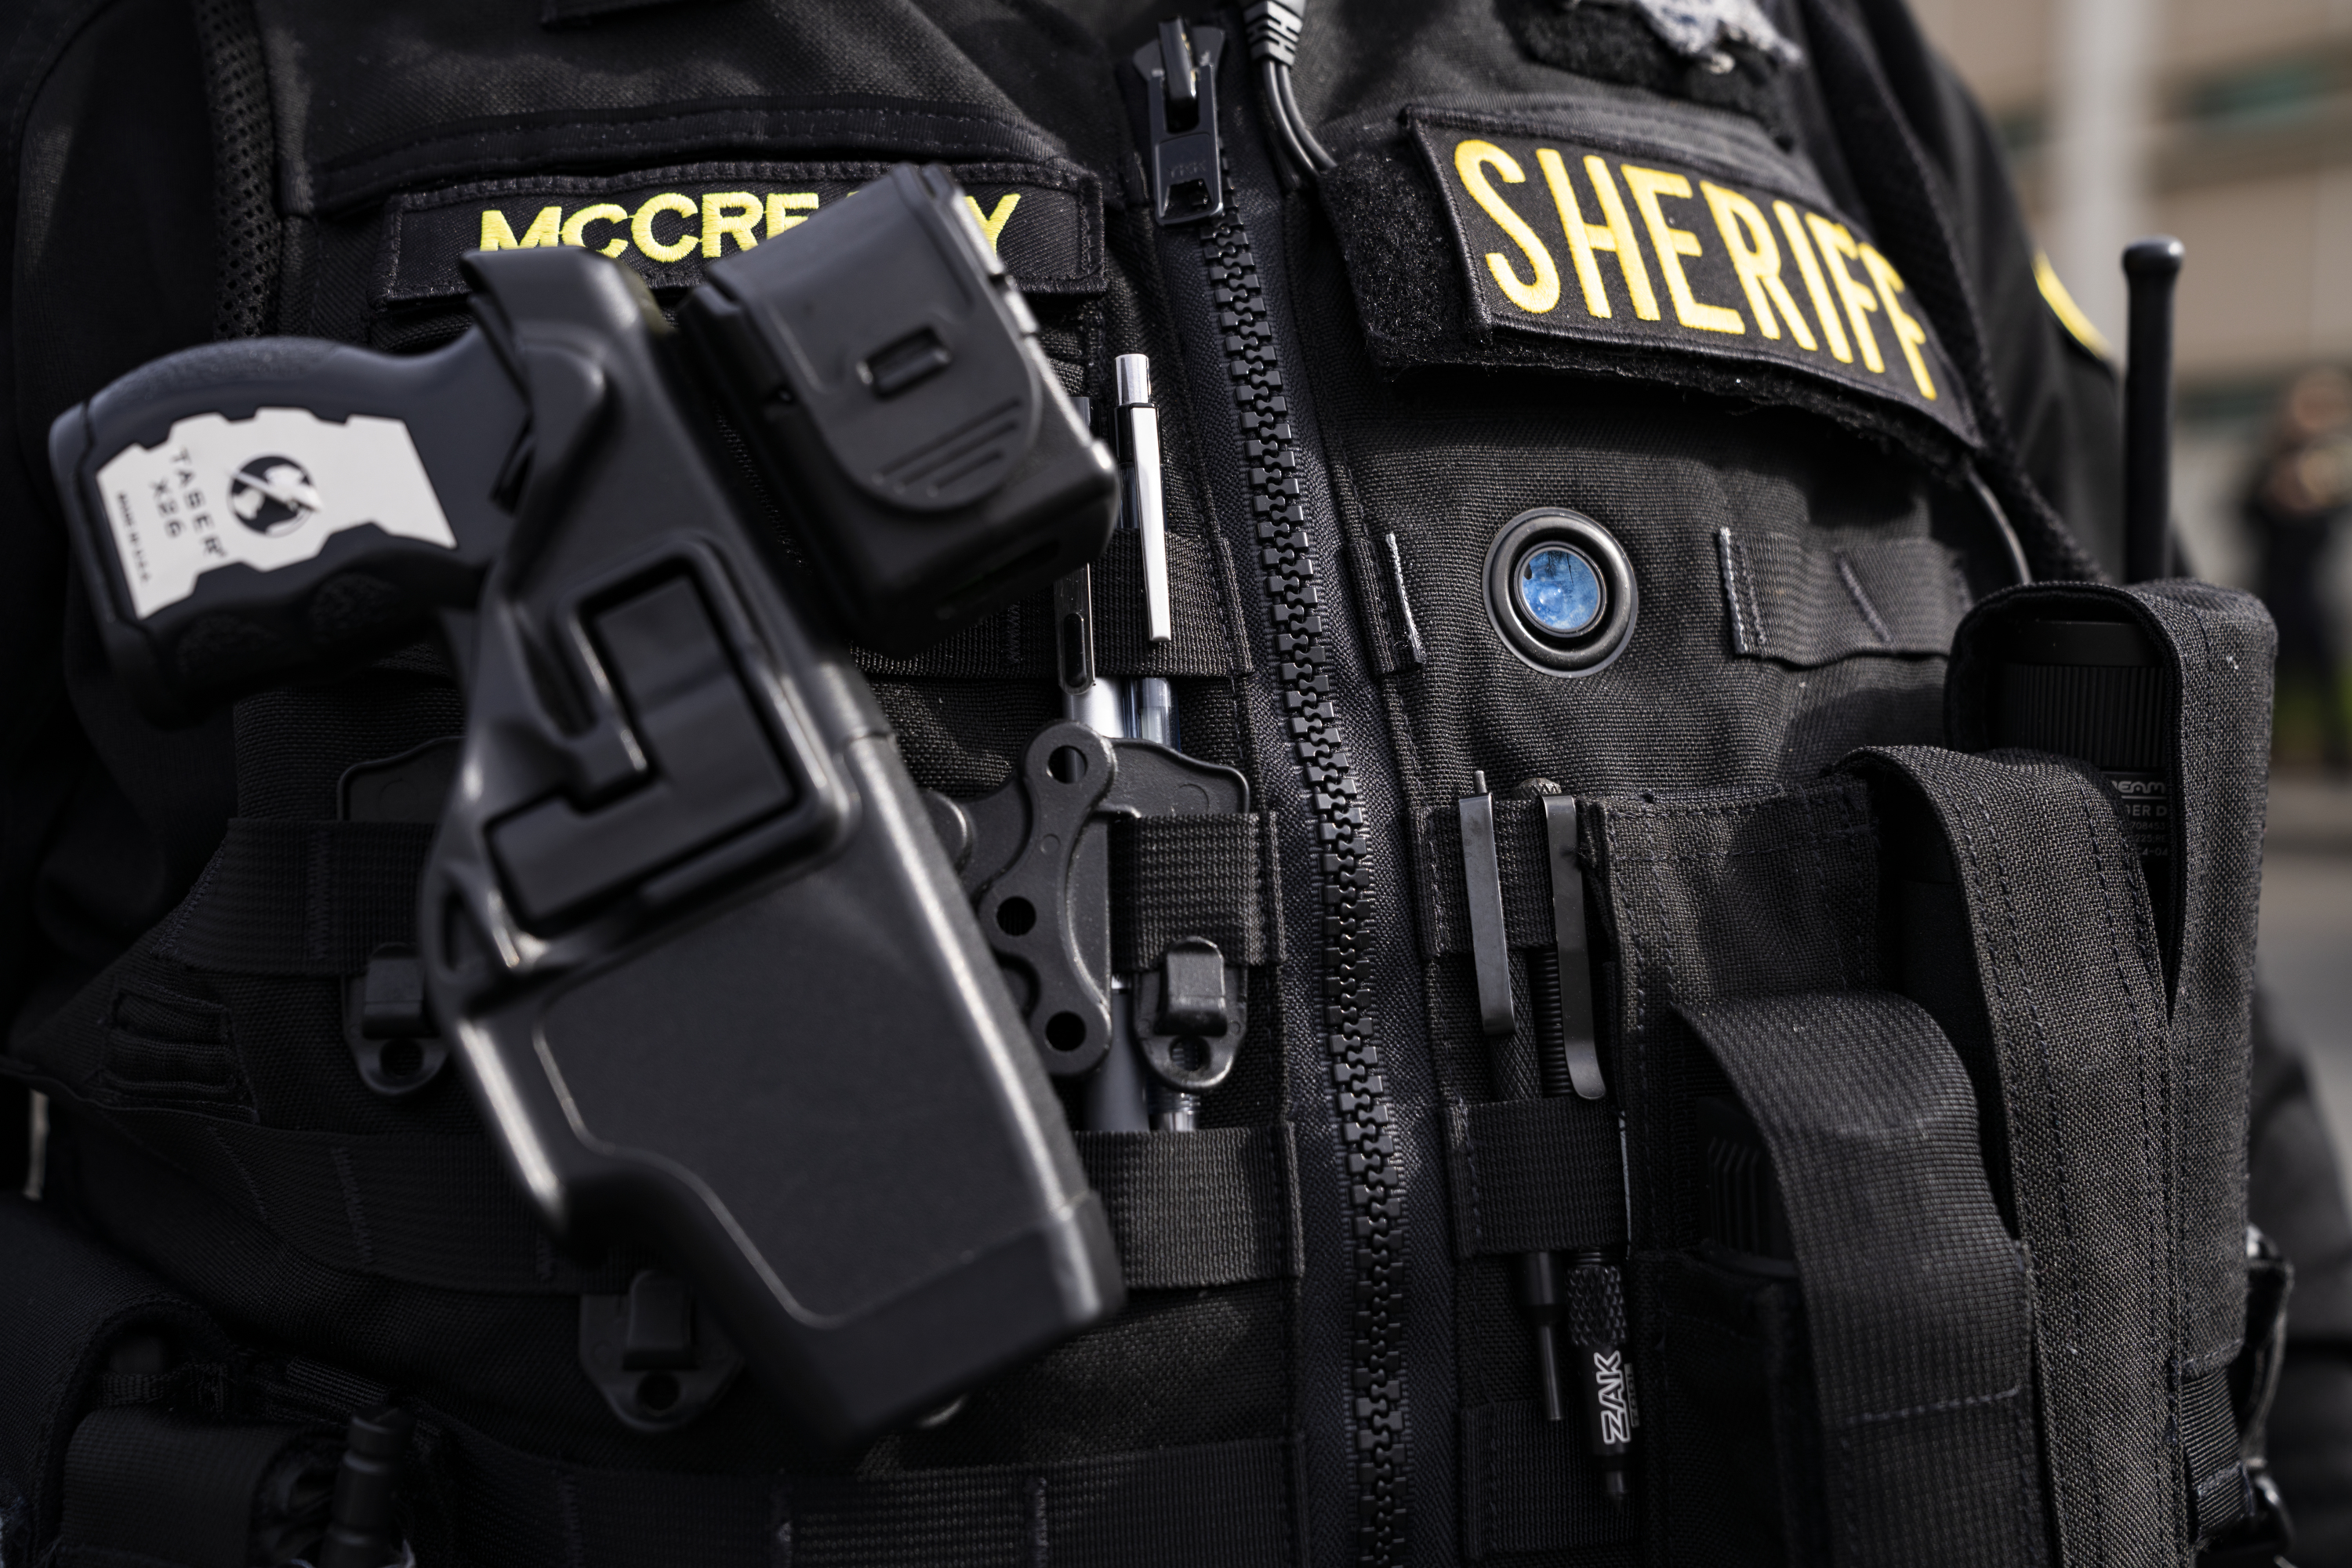 Deal approved to implement police body cameras in Portland - OPB